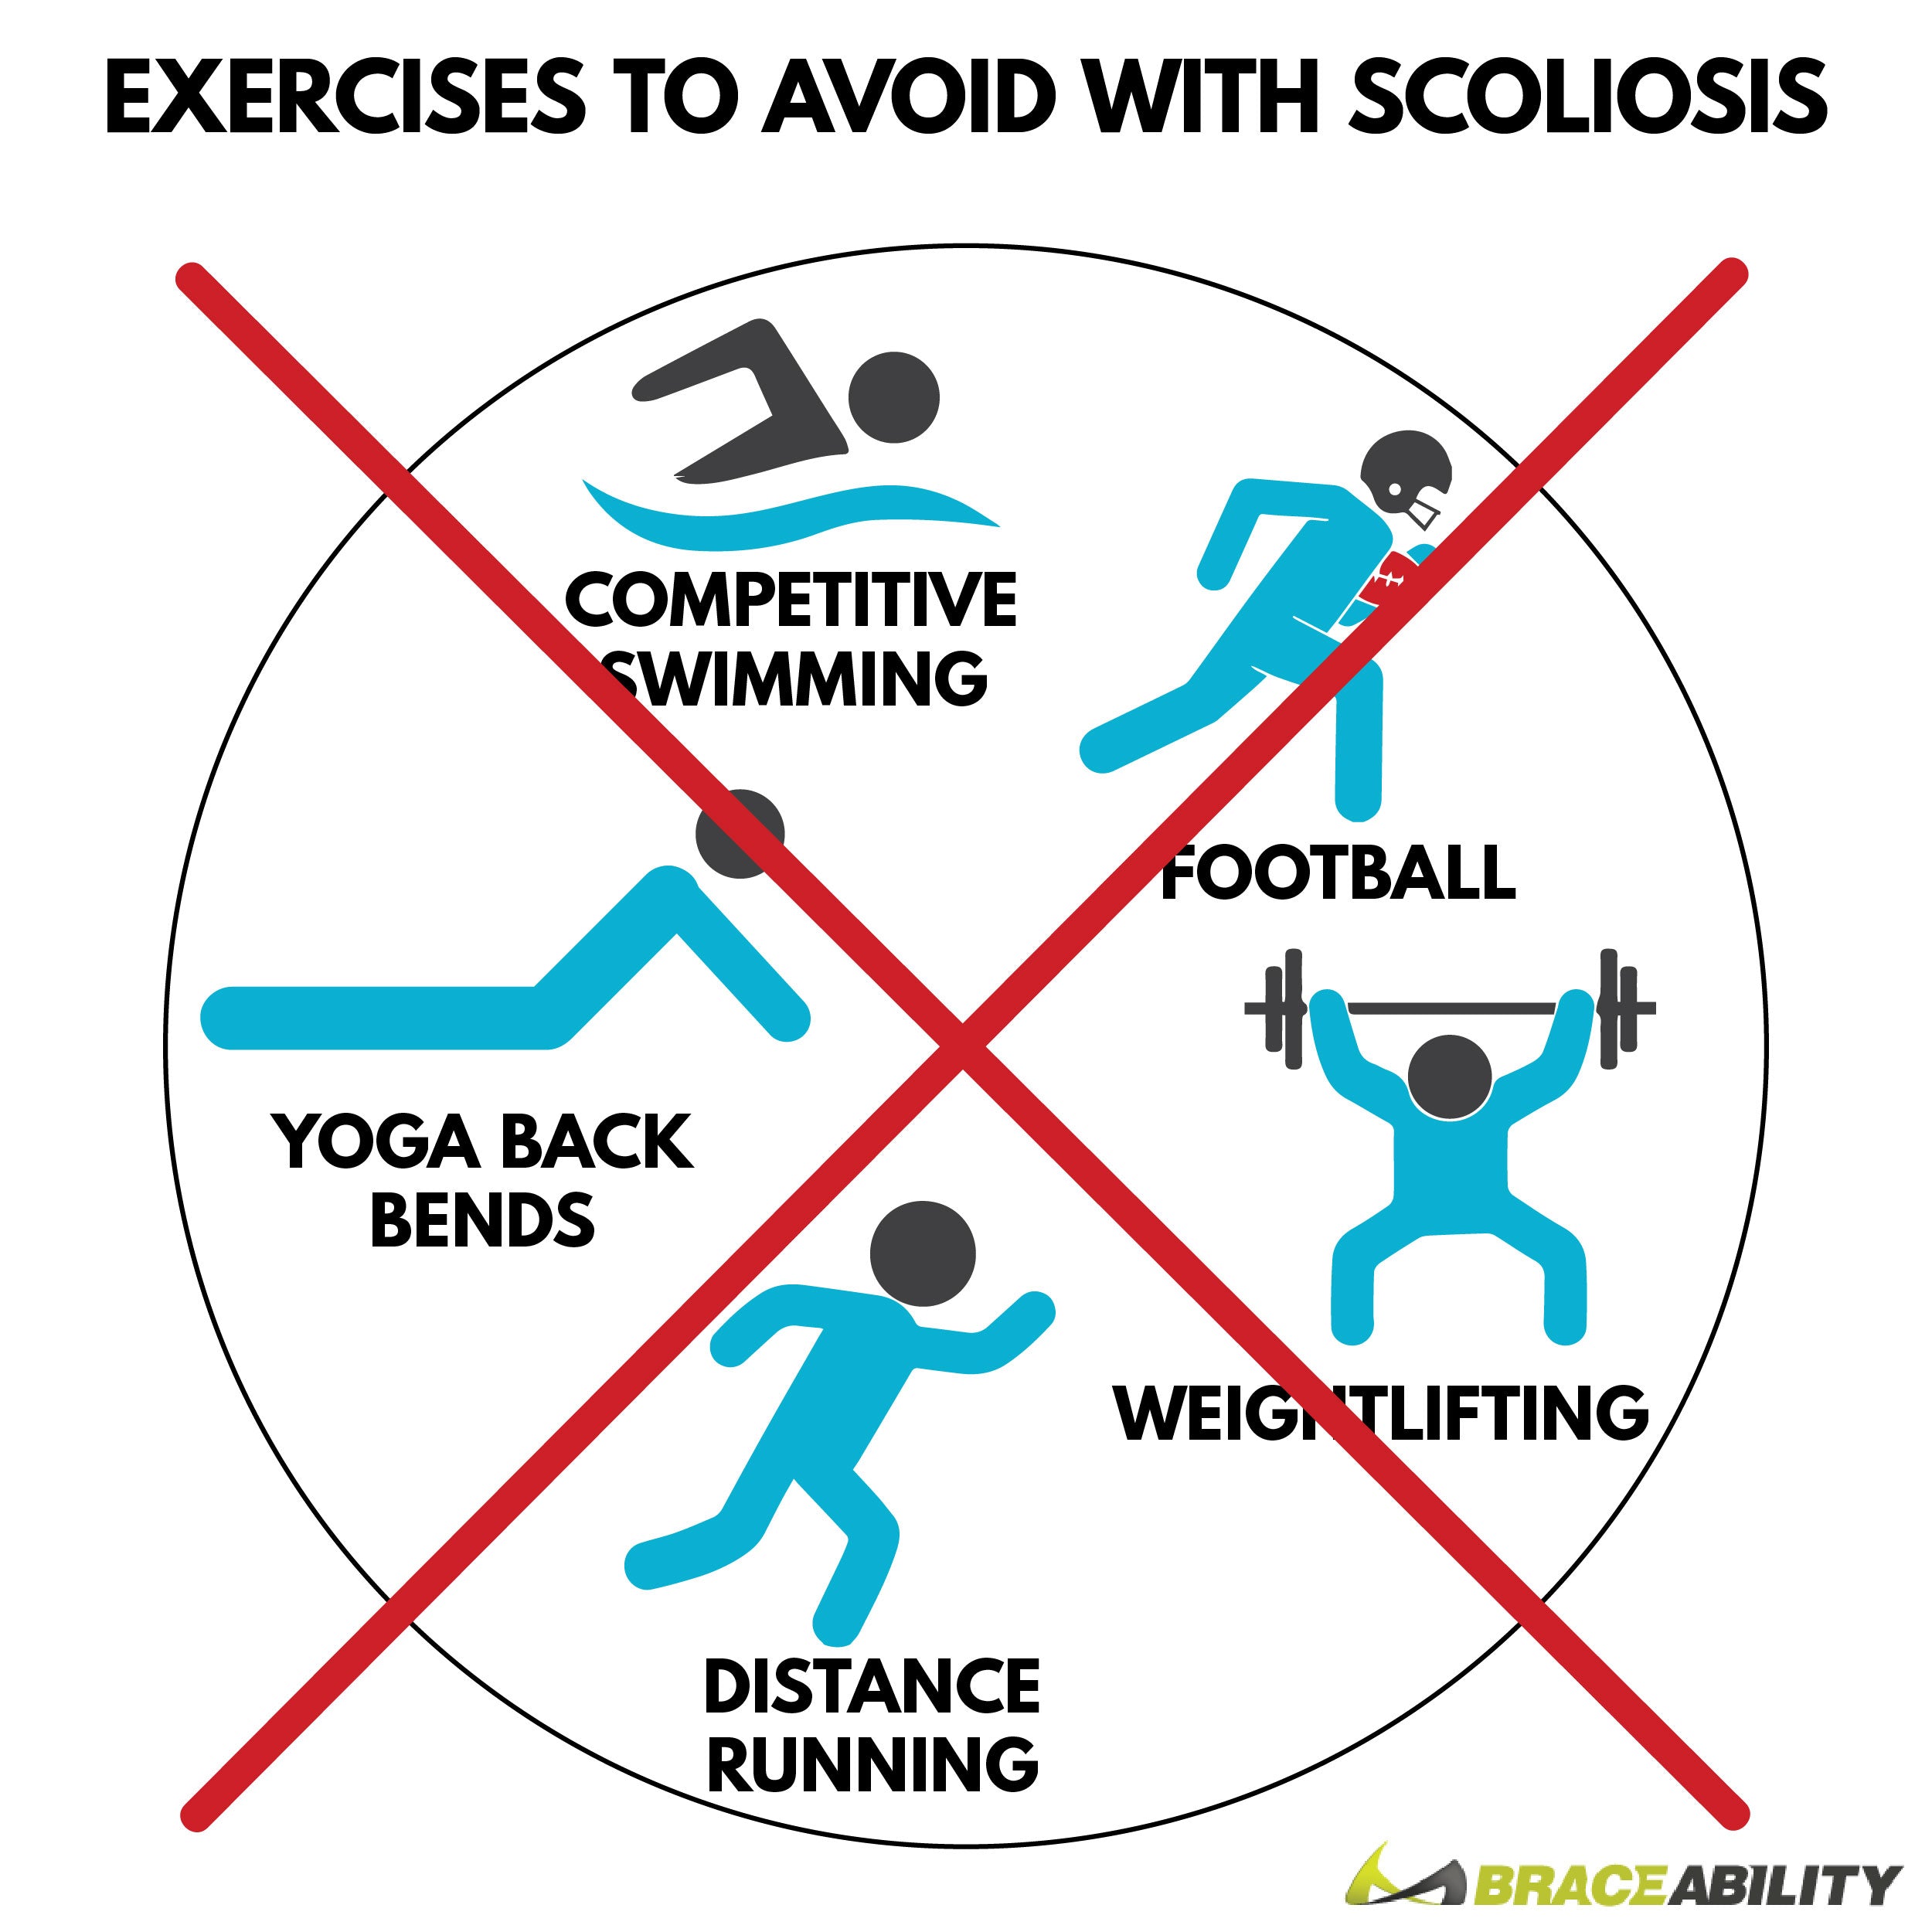 do not play contact sports or run long distance with scoliosis